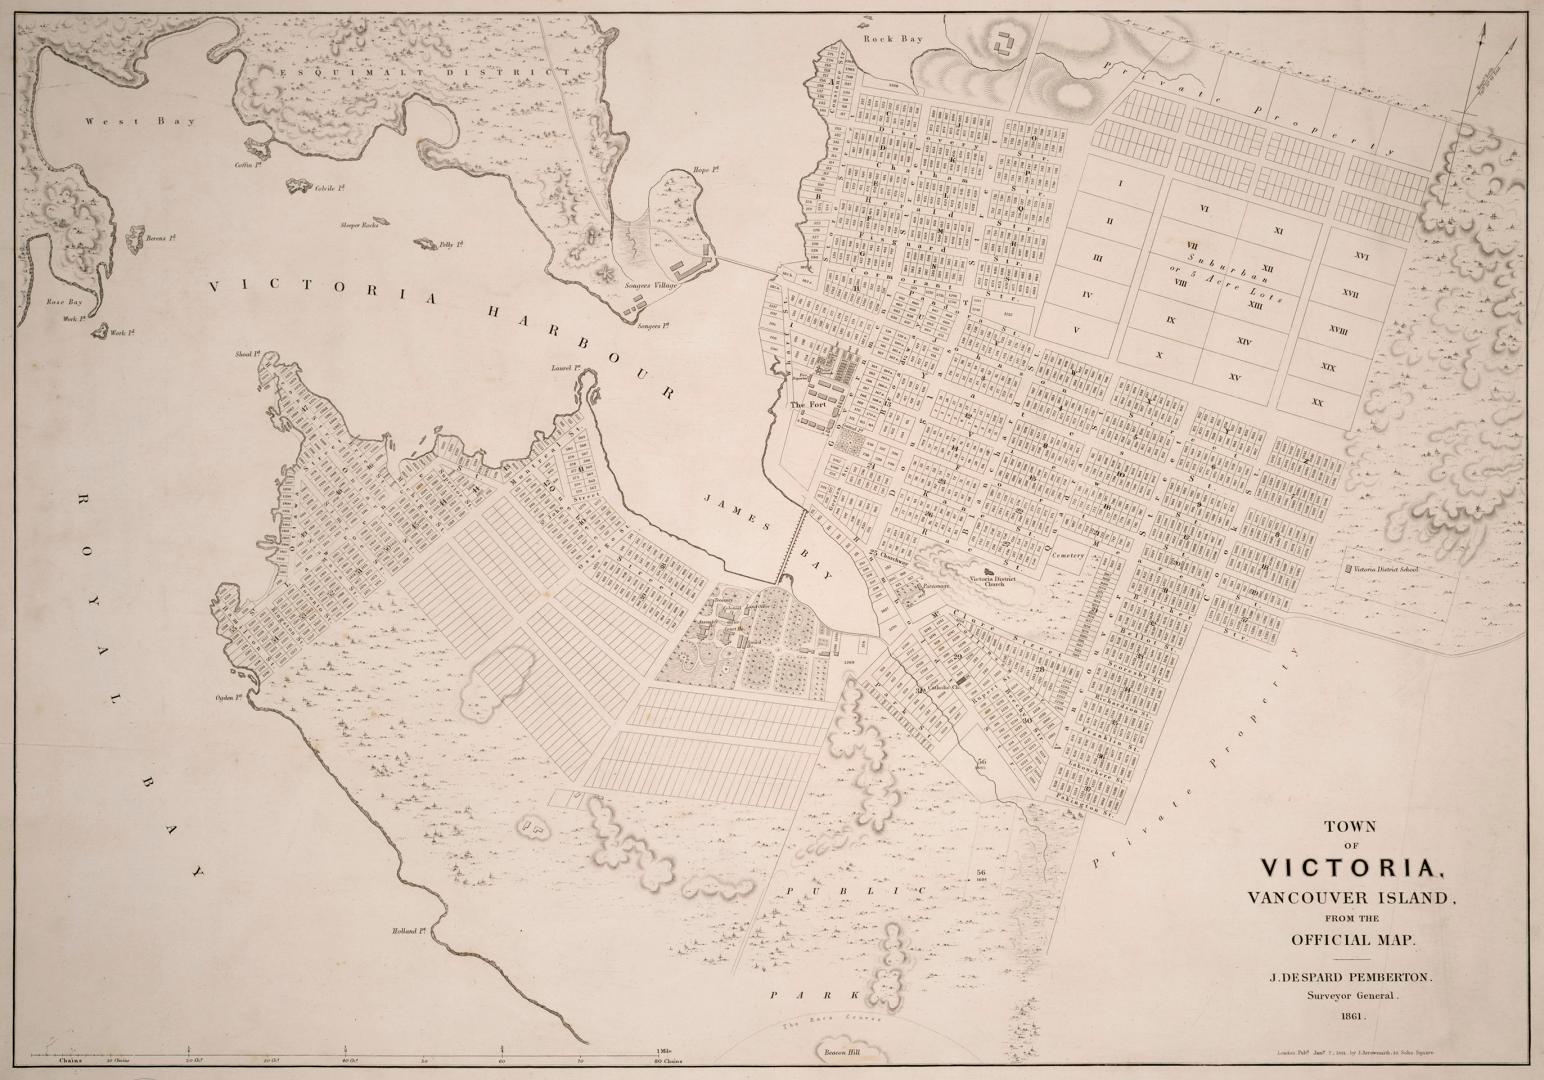 Town of Victoria, Vancouver Island from the official map